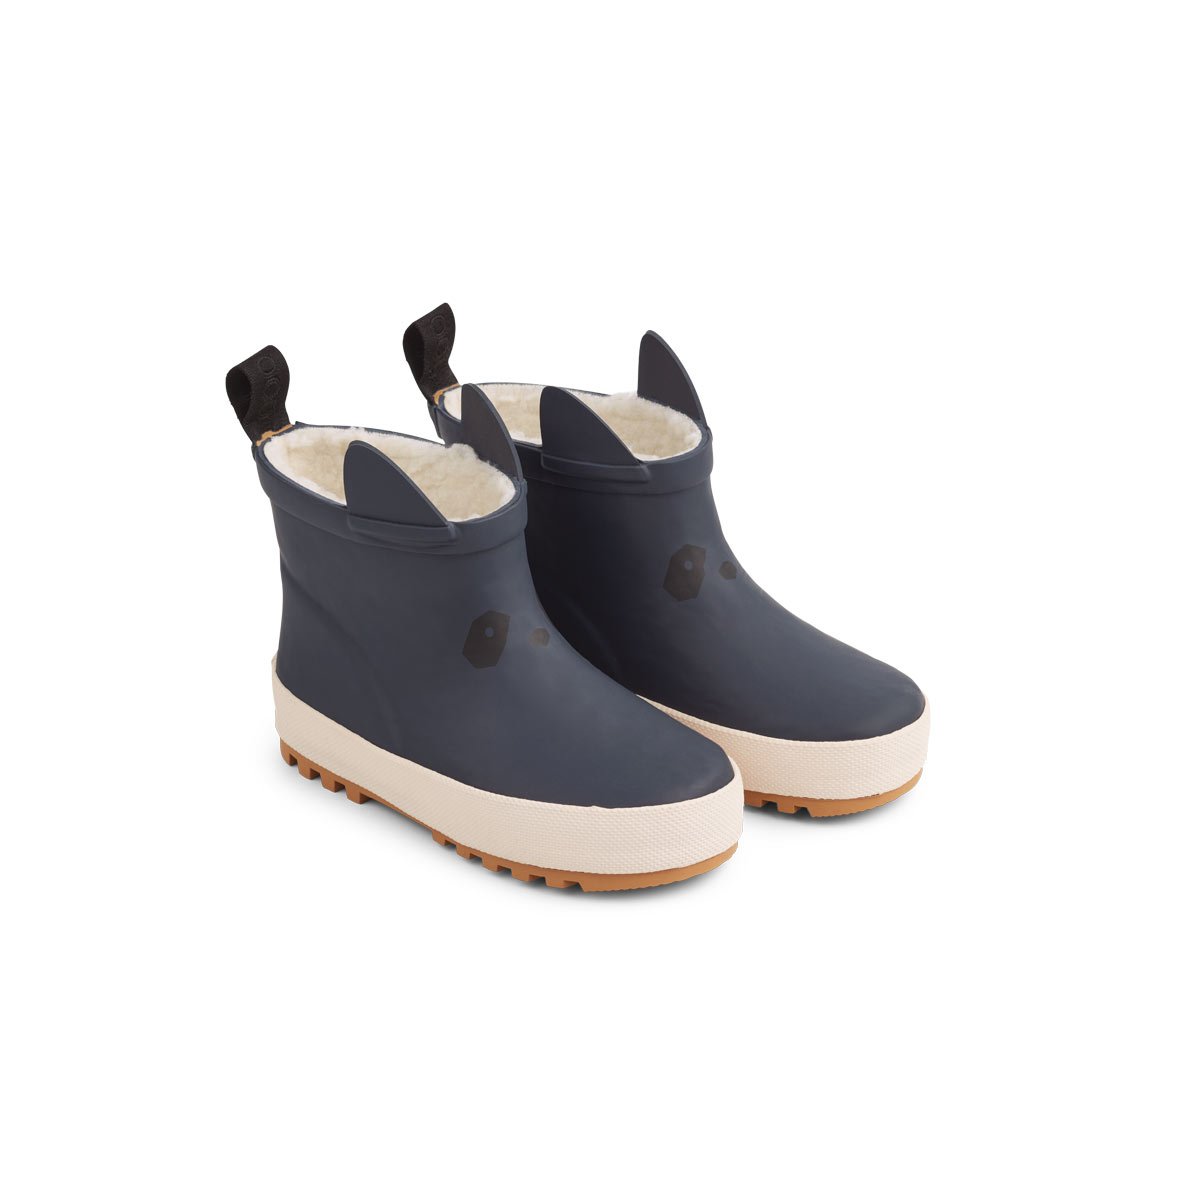 Bottes de pluie Navy Thermo Liewood